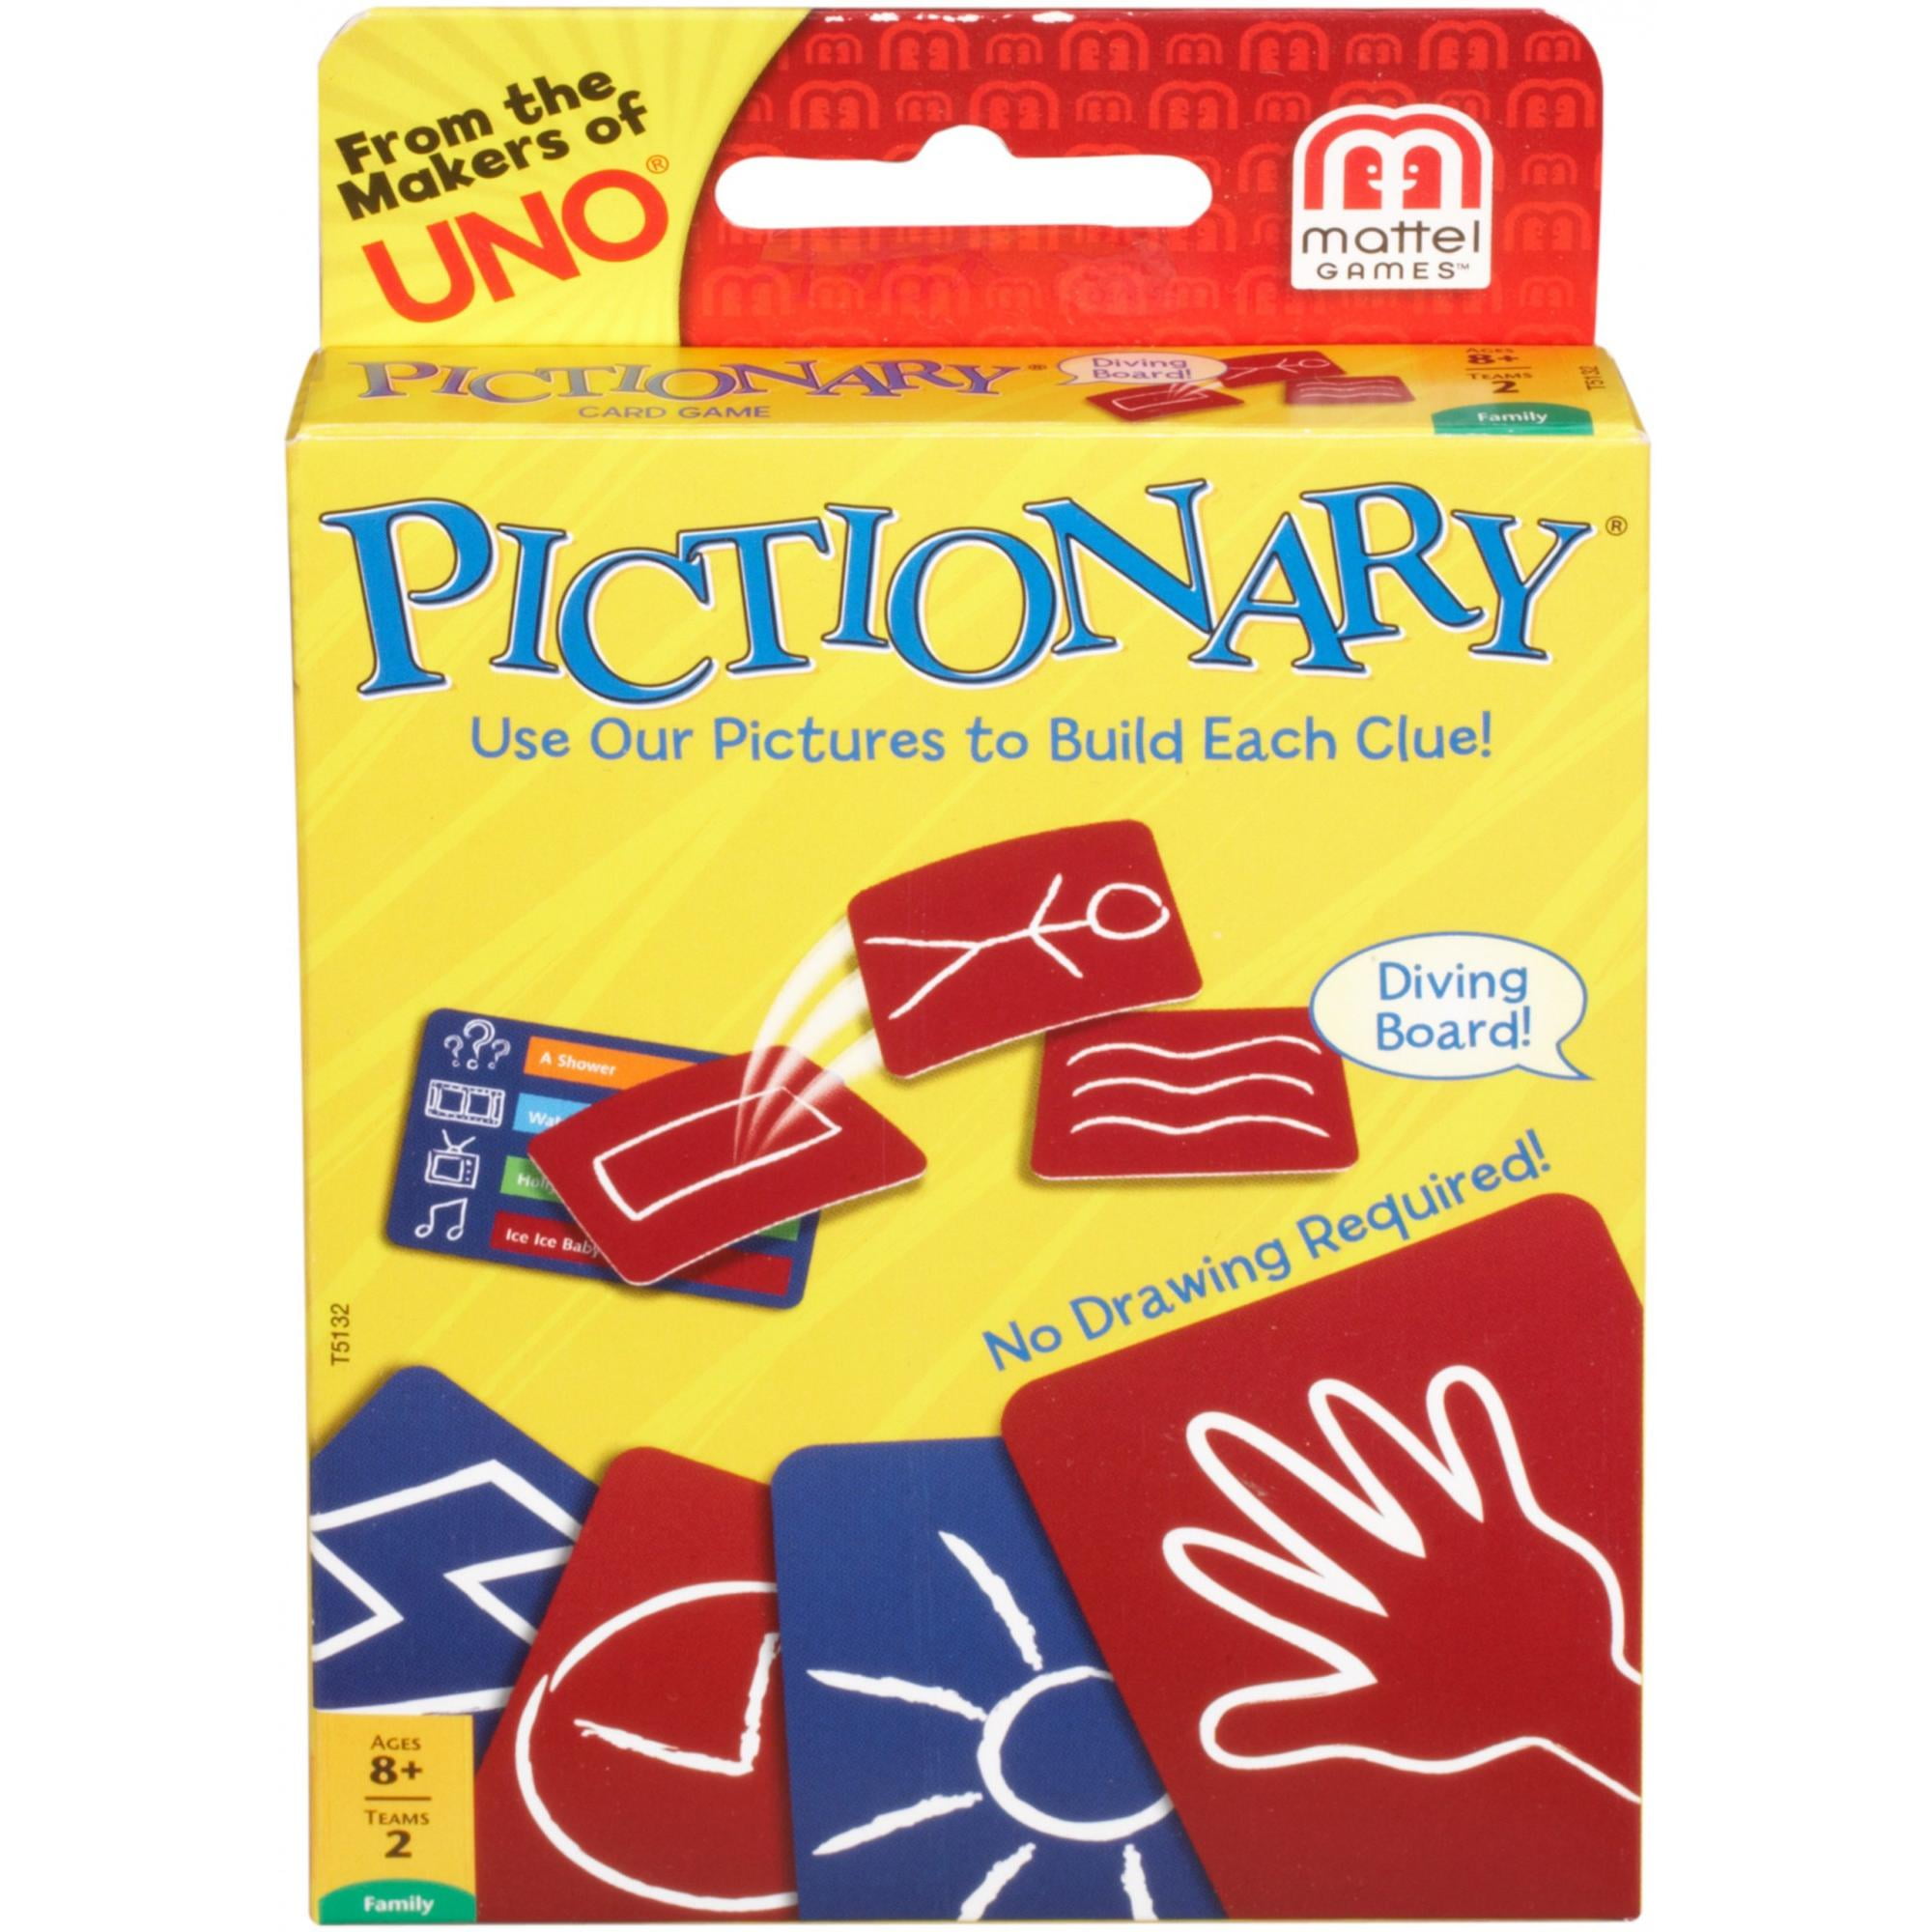 Pictionary second edition board game replacement pieces qty 100 random cards 